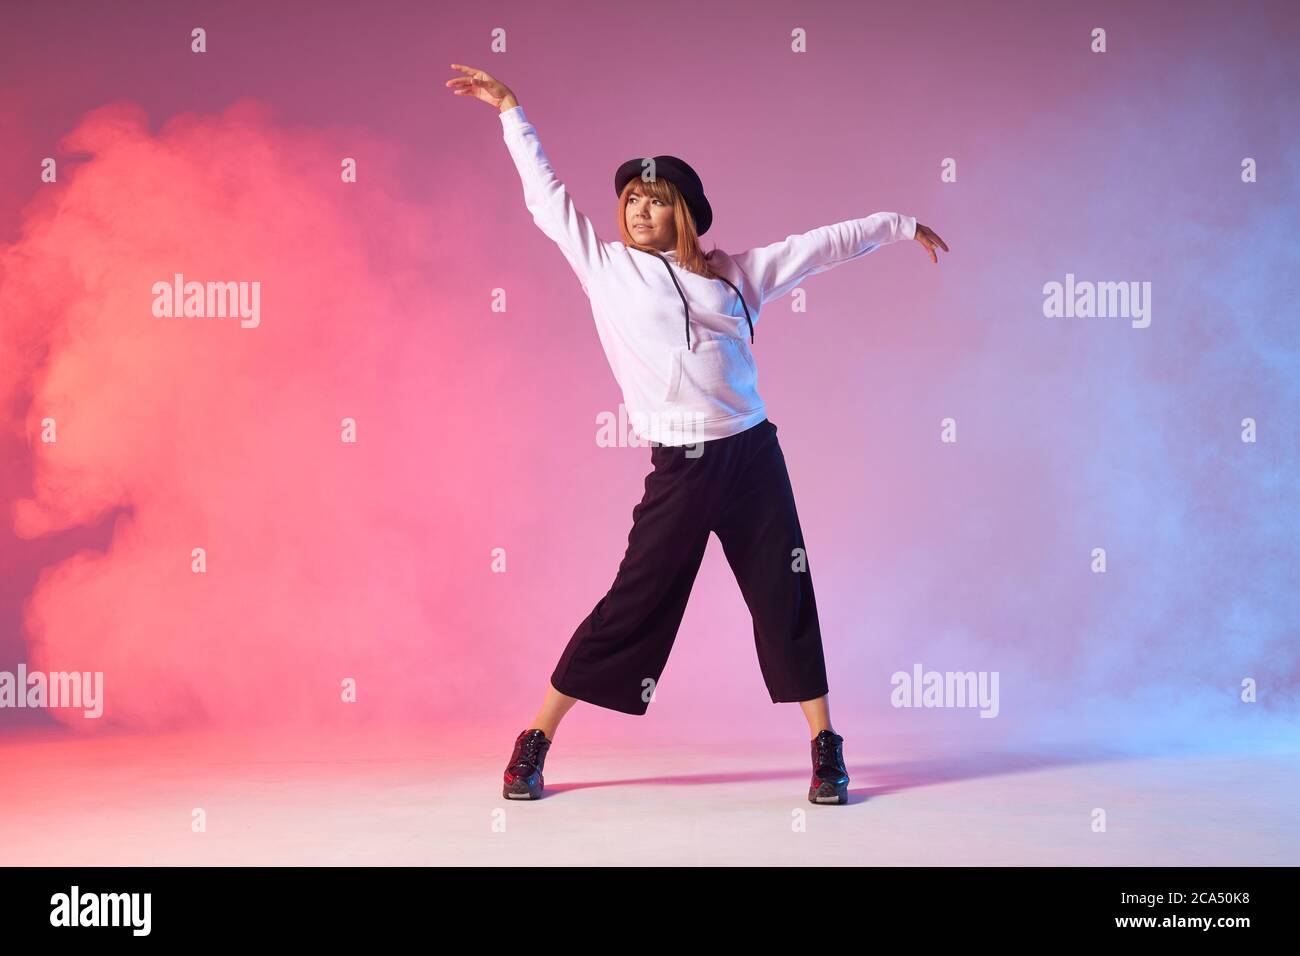 Funk dance workout. Portrait of young sporty woman in motion performing dance element, raising hands up, looking away, training in school dancehall, s Stock Photo